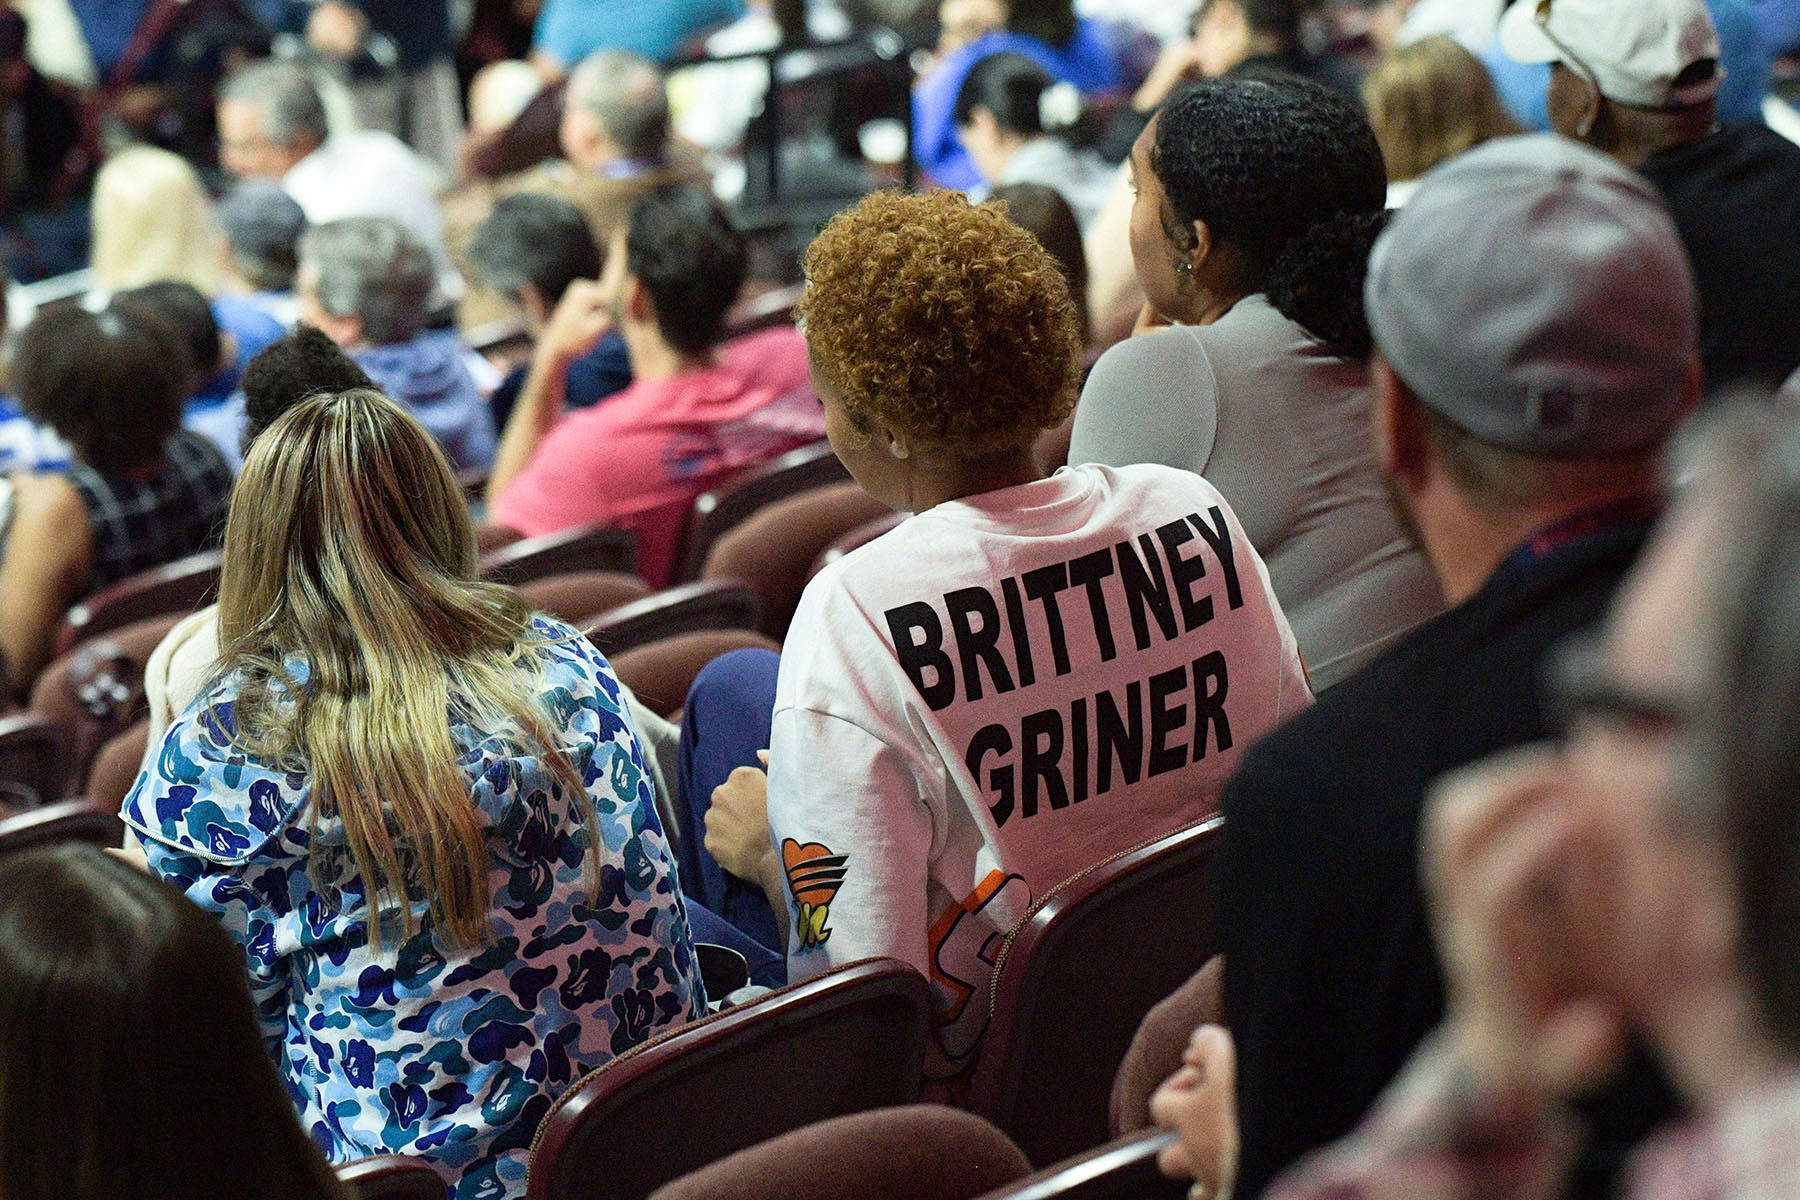 Amari DeBerry wears a shirt in support of Brittney Griner during a WNBA game.